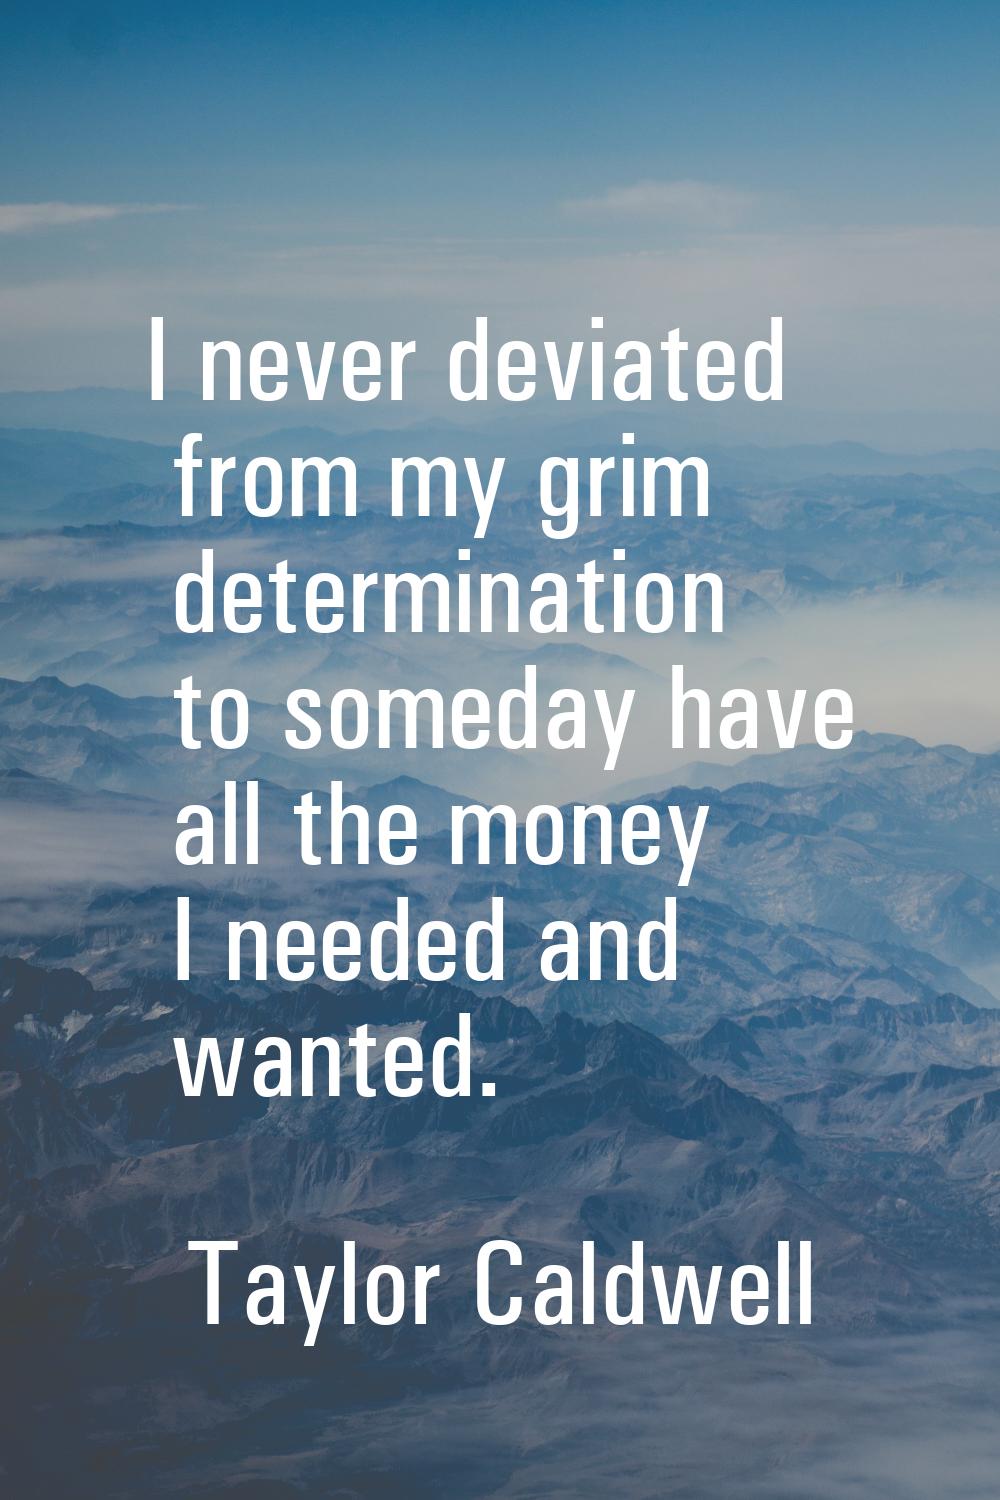 I never deviated from my grim determination to someday have all the money I needed and wanted.